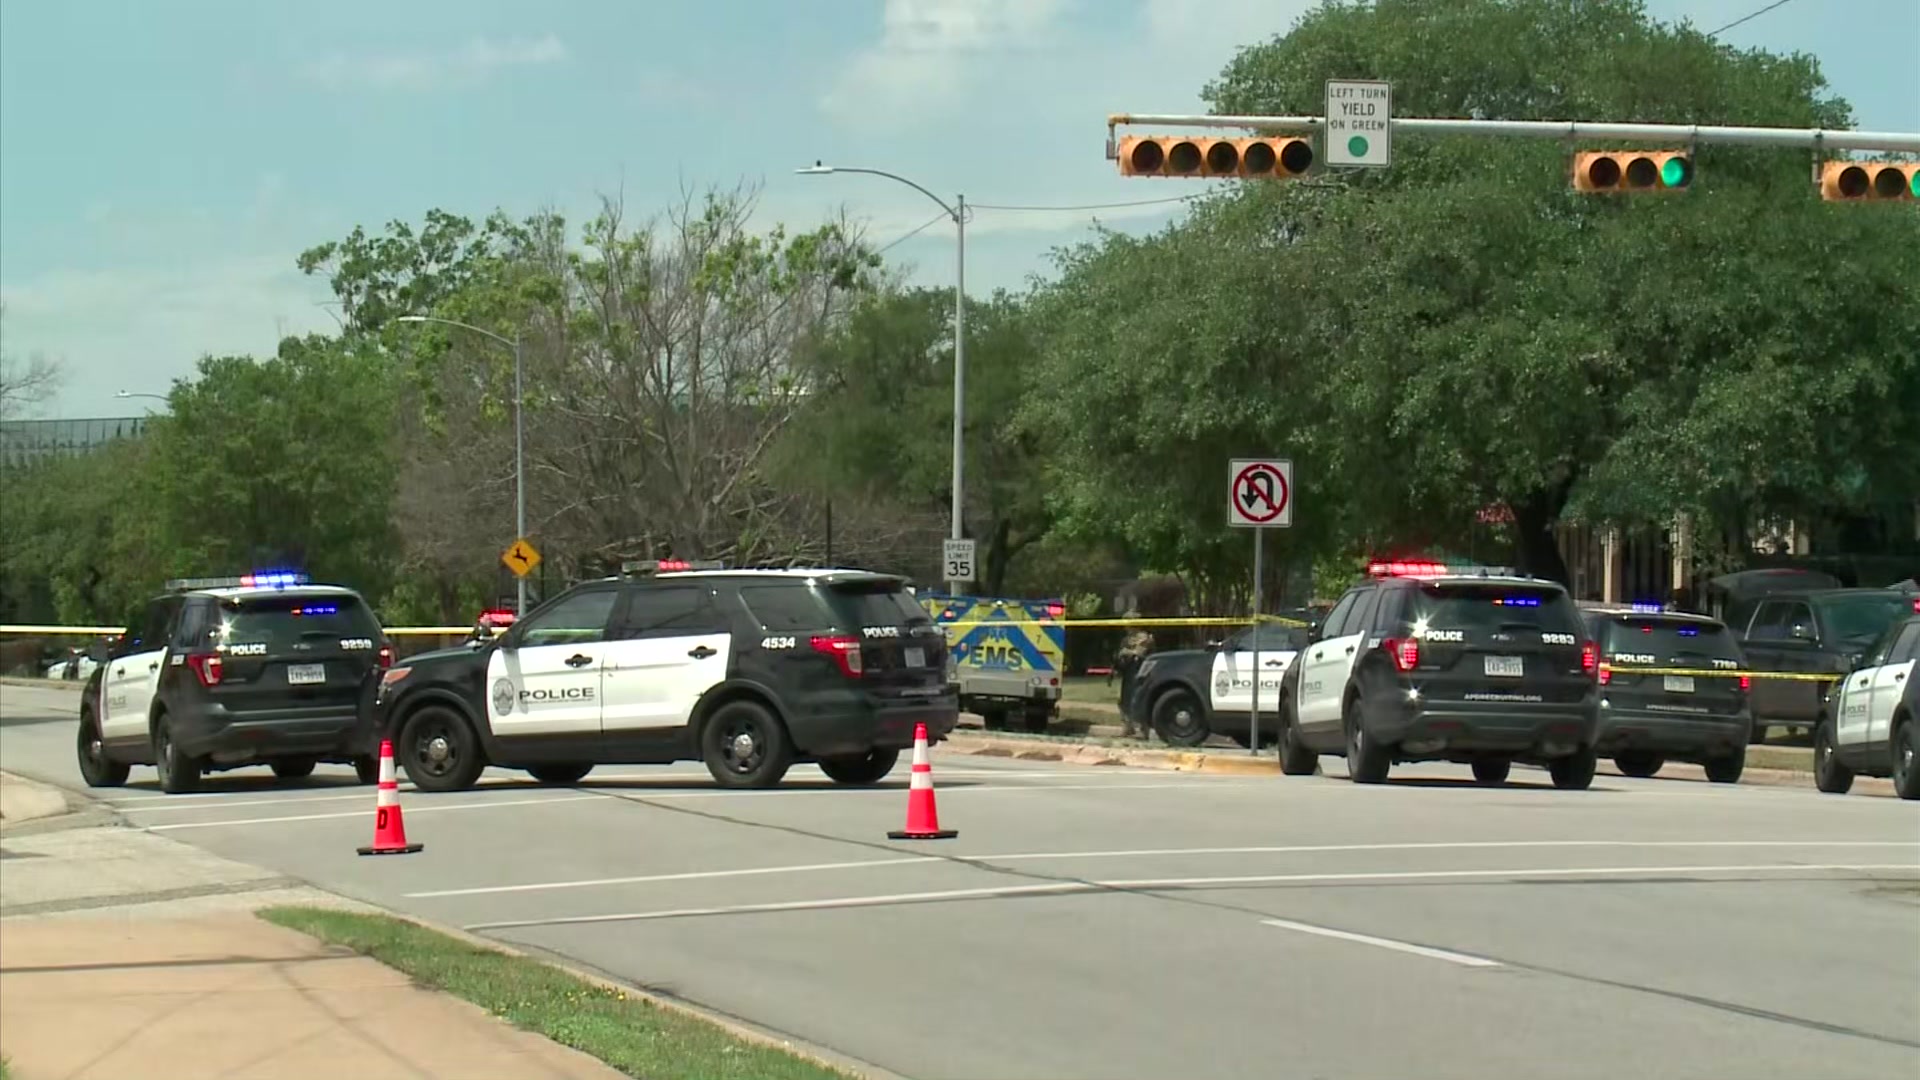 Heartbroken': What we know about the 3 victims of the Austin shooting